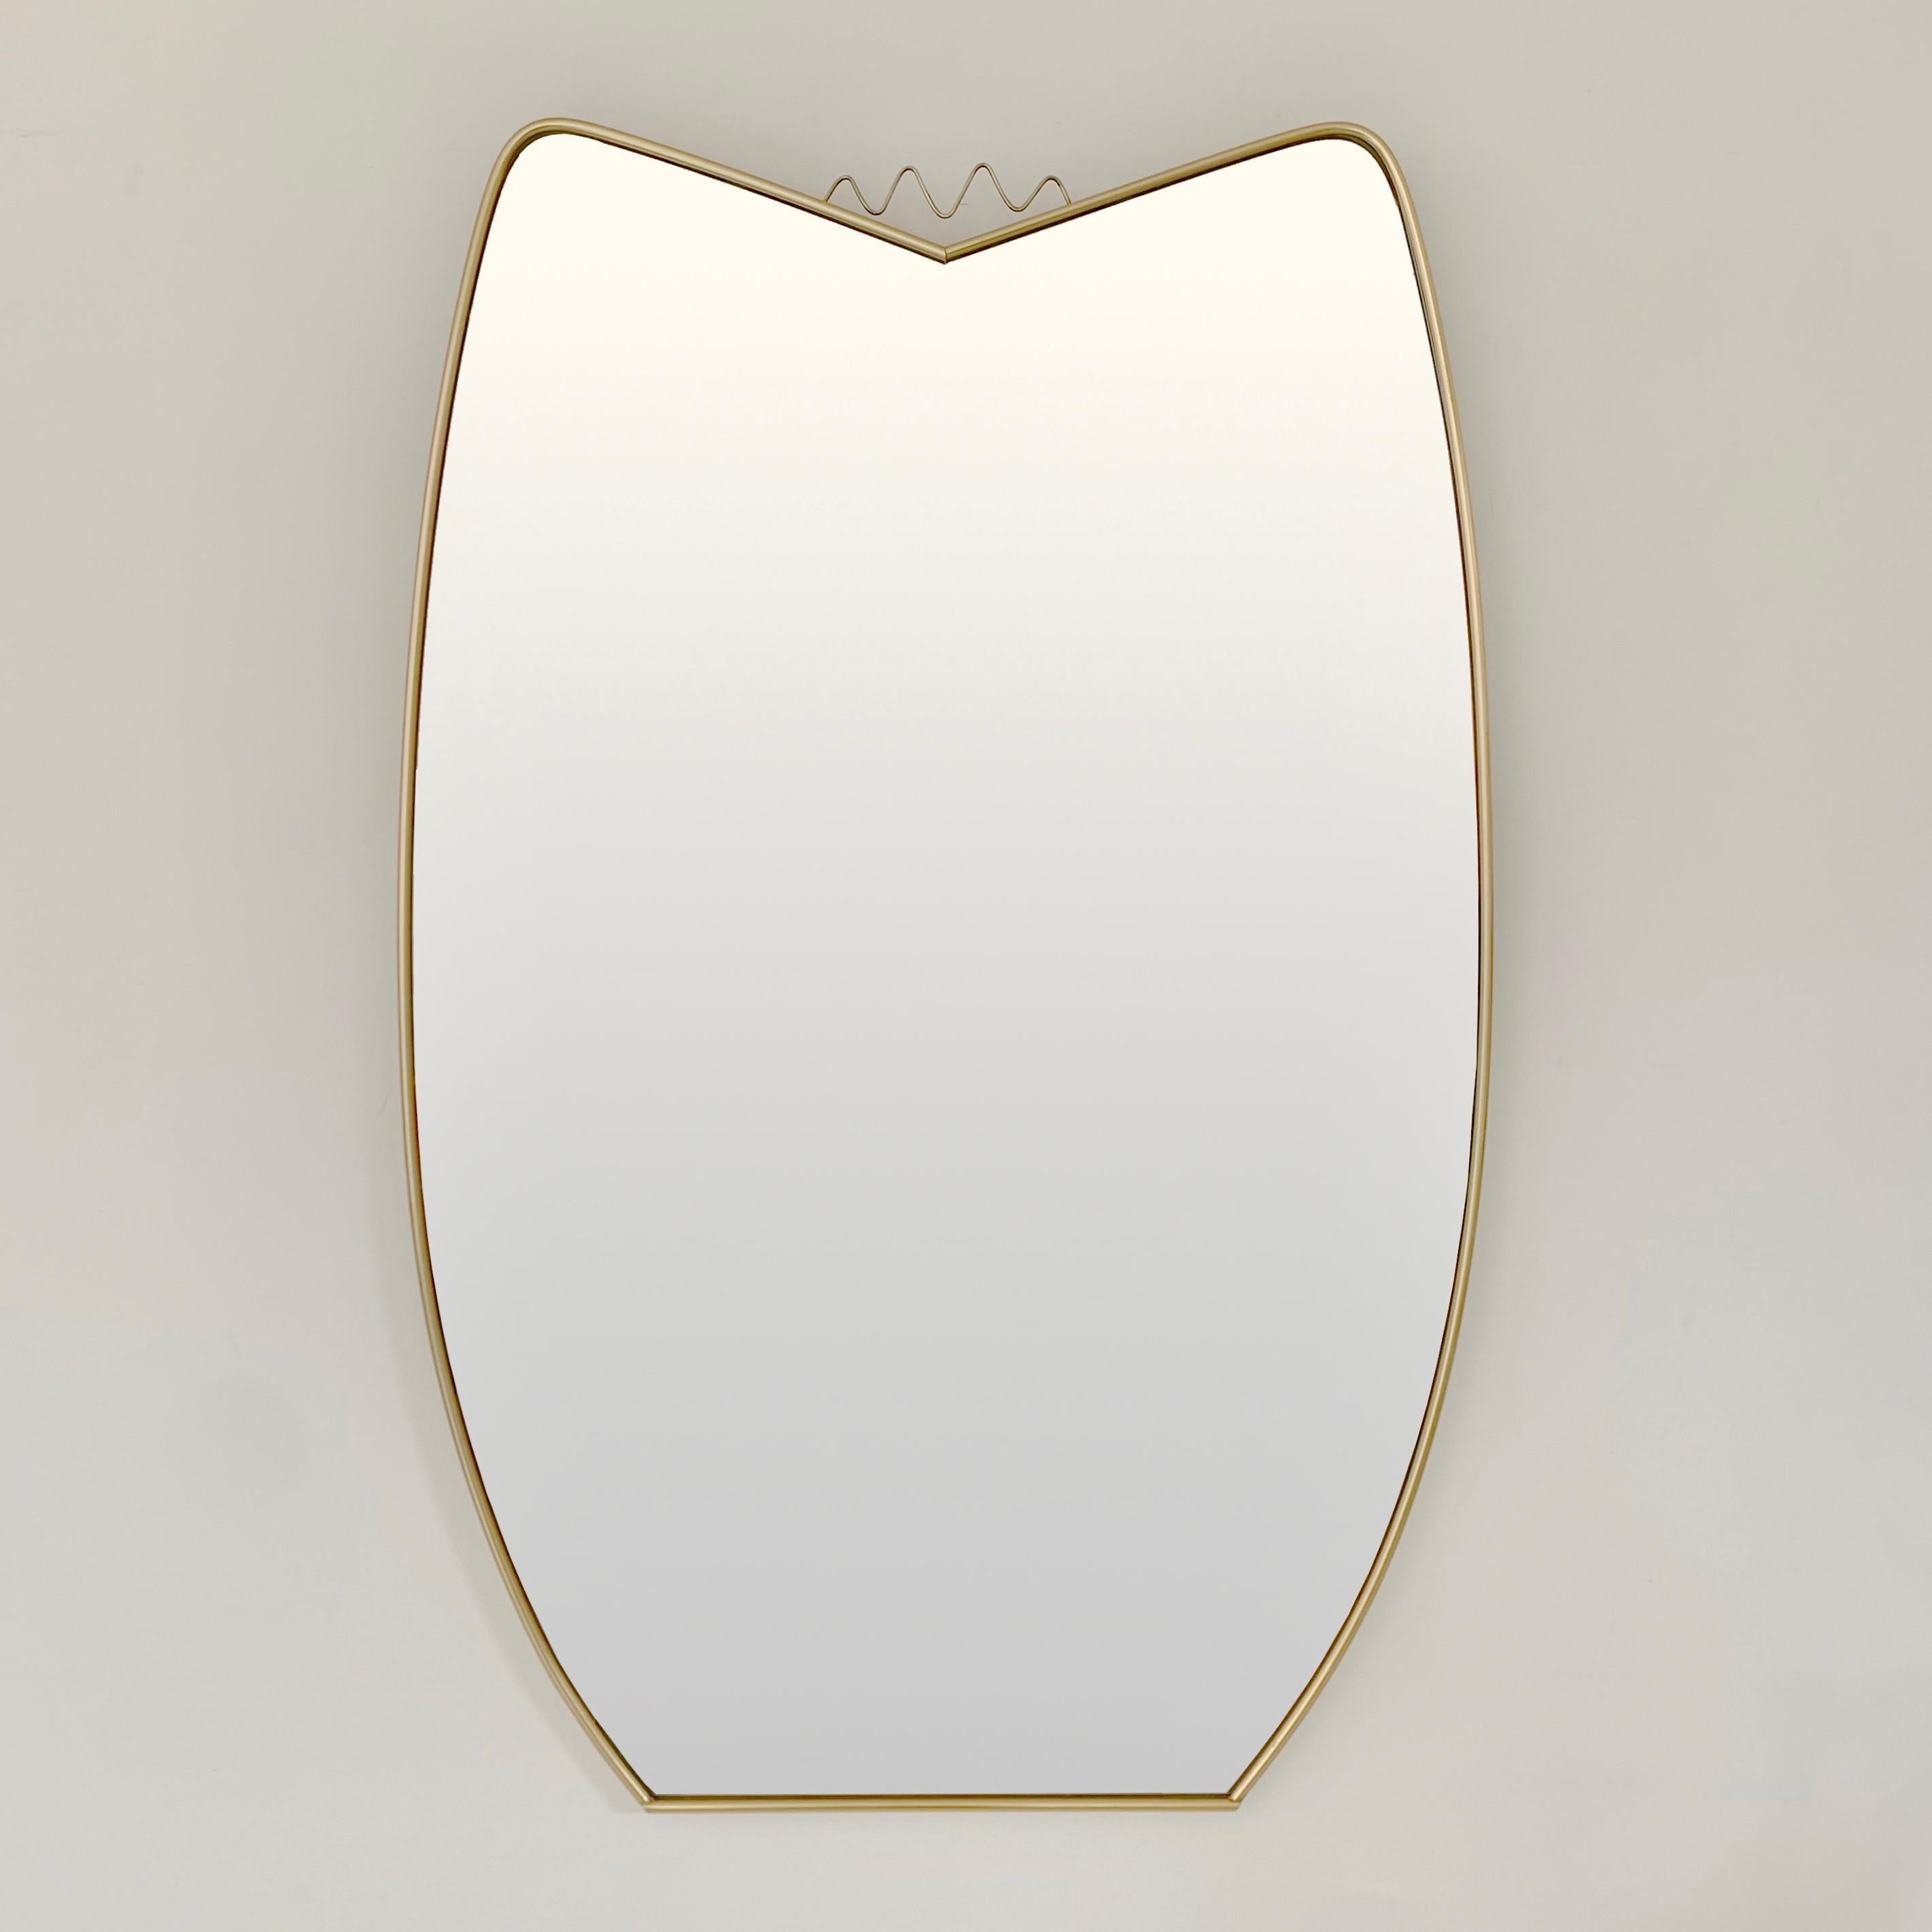 Elegant and unusual mid-century wall mirror, circa 1950, Italy.
Brass, mirorr.
Dimensions: 96 cm H, 63 cm W, 3 cm D.
Good original vintage condition.
Very decorative wall mirror.
All purchases are covered by our Buyer Protection Guarantee.
This item